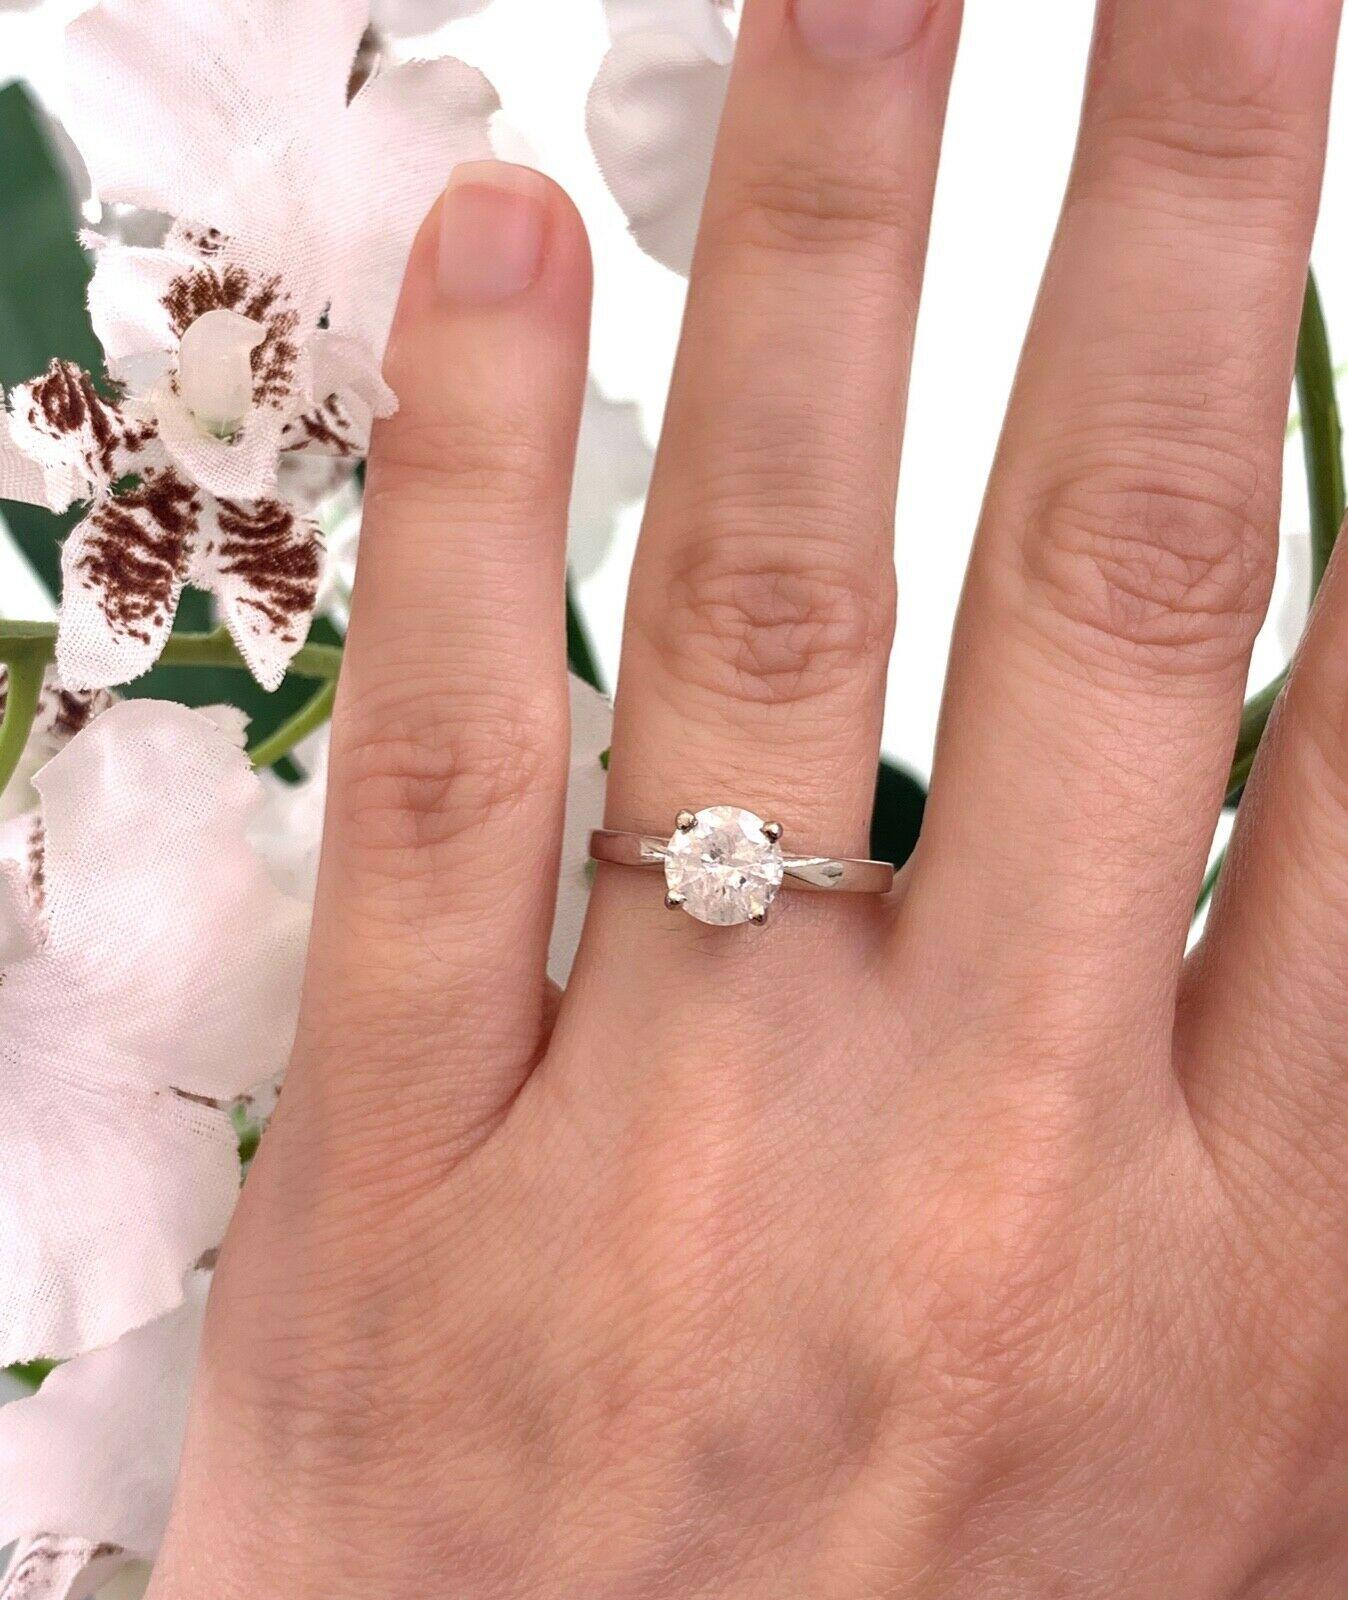 Round Brilliant Diamond Ring
Style: Solitaire Engagement Ring
Metal: 14K White Gold
Size / Measurements:  6.5, sizable
TCW: 1.01 Carats
Diamond:  Round Brilliant Cut
Color & Clarity:  G Color, I2 Clarity (Salt & Pepper)
Hallmark: 14K, 1.01
Includes: